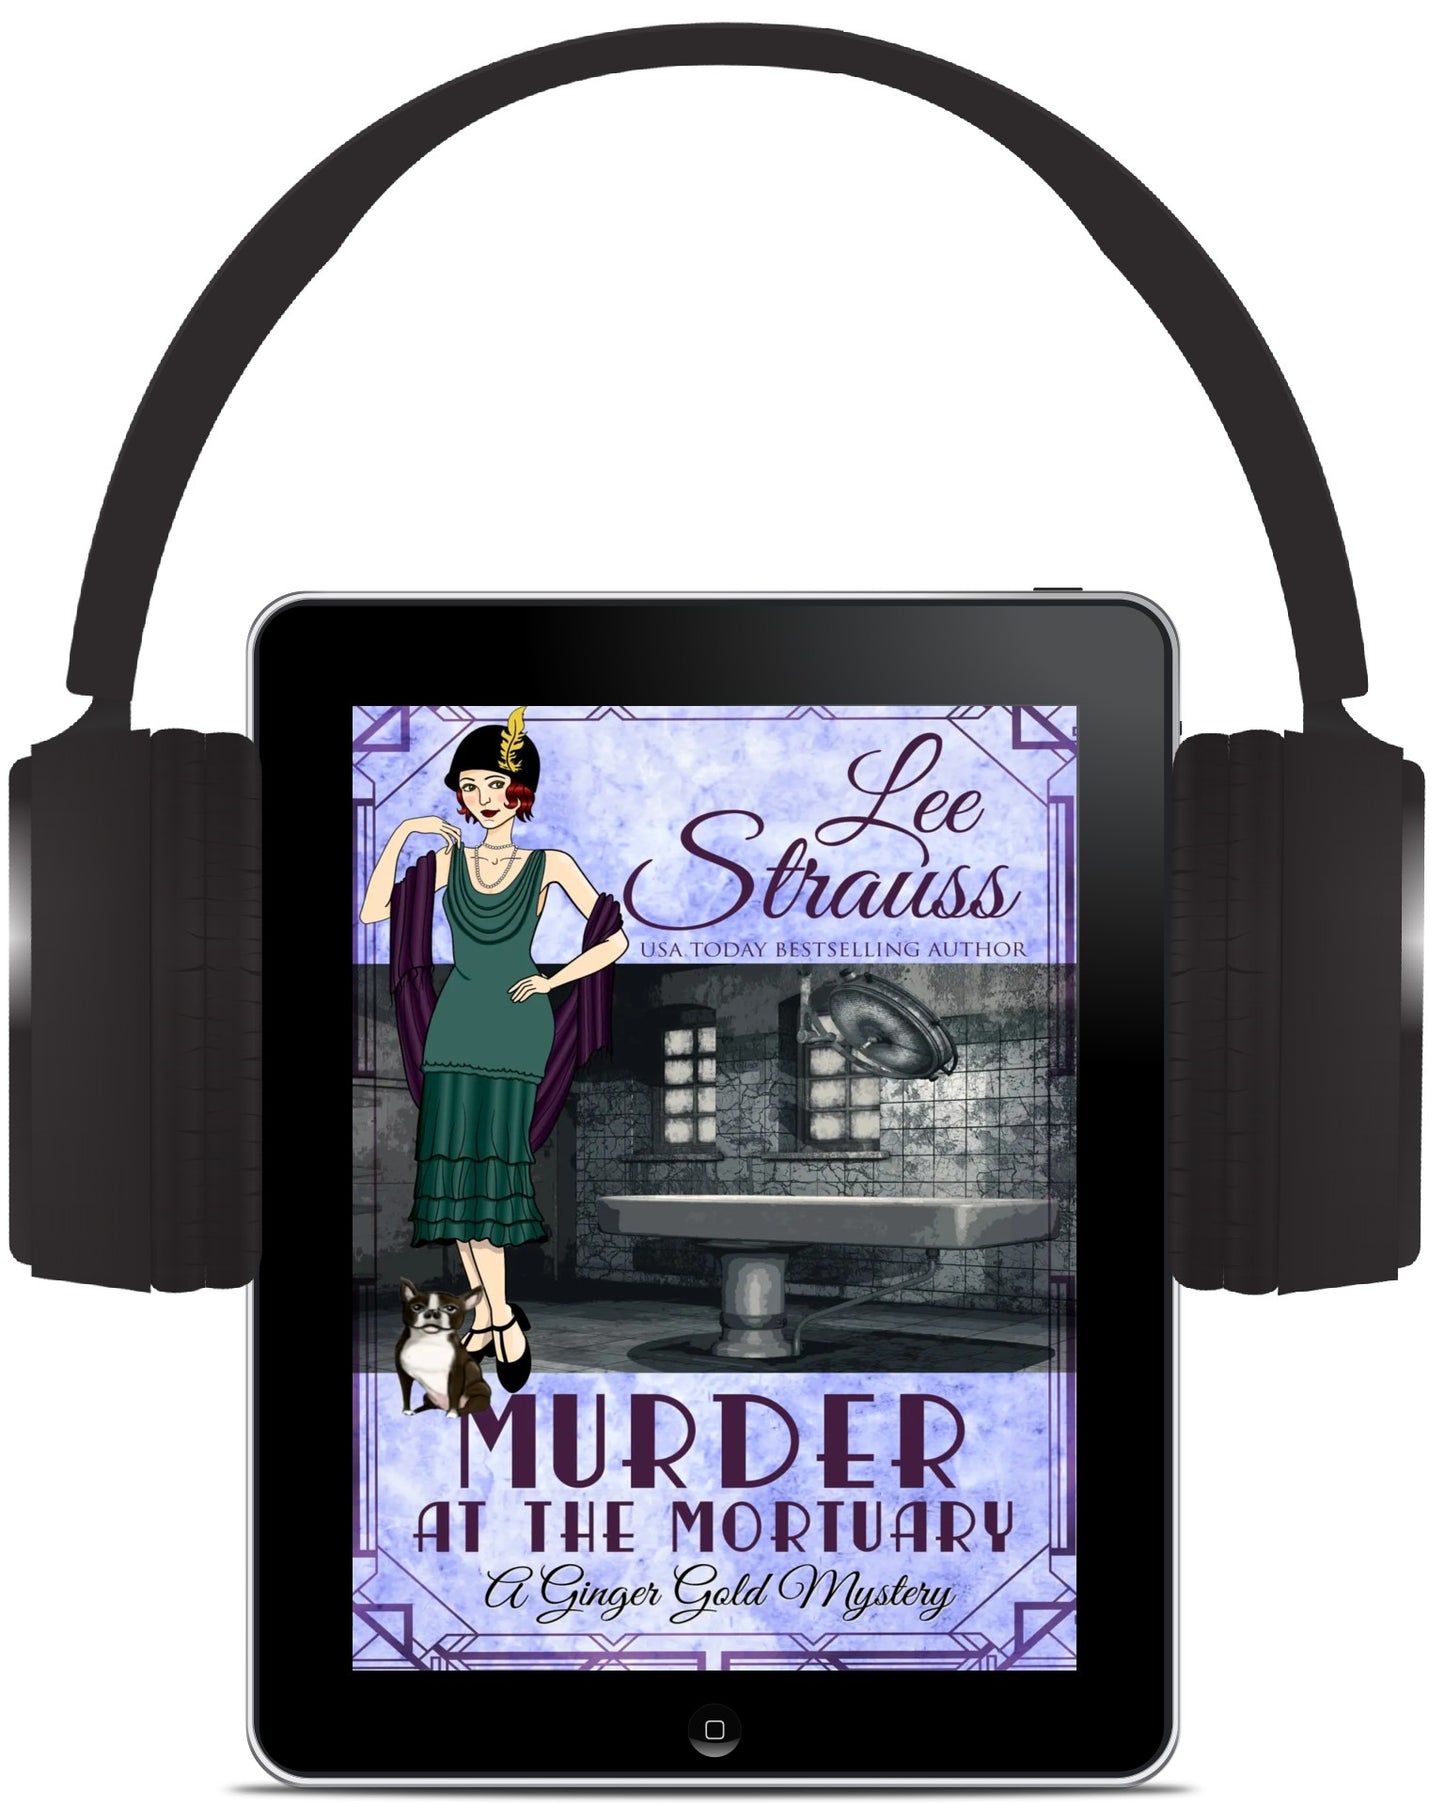 Murder at the Mortuary, A Ginger Gold Mystery, 1920s cozy historical mystery by Lee Strauss